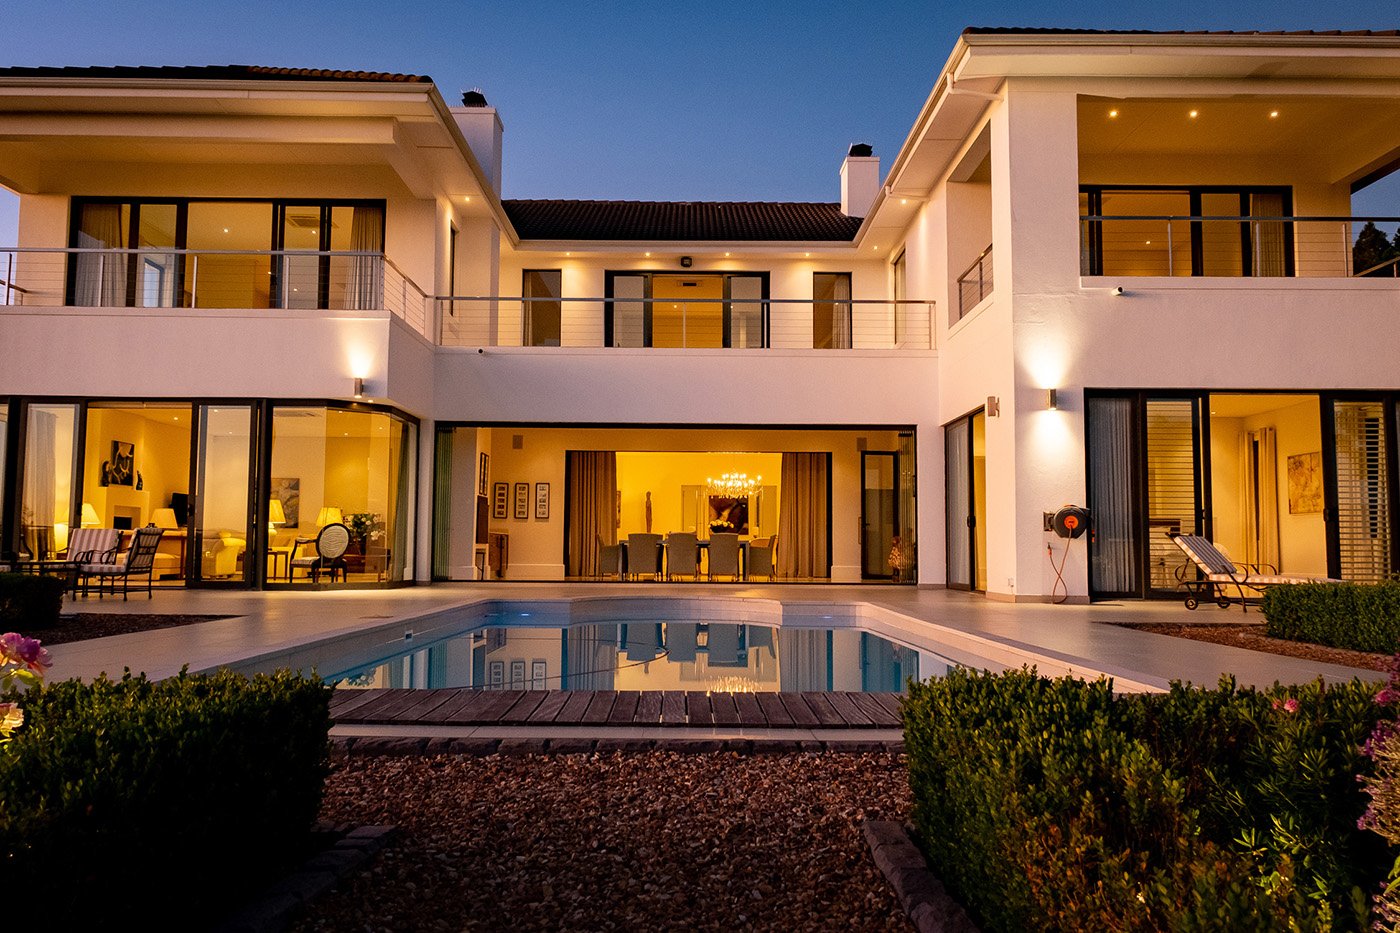 real-estate-photographer-cape-town-20.jpg